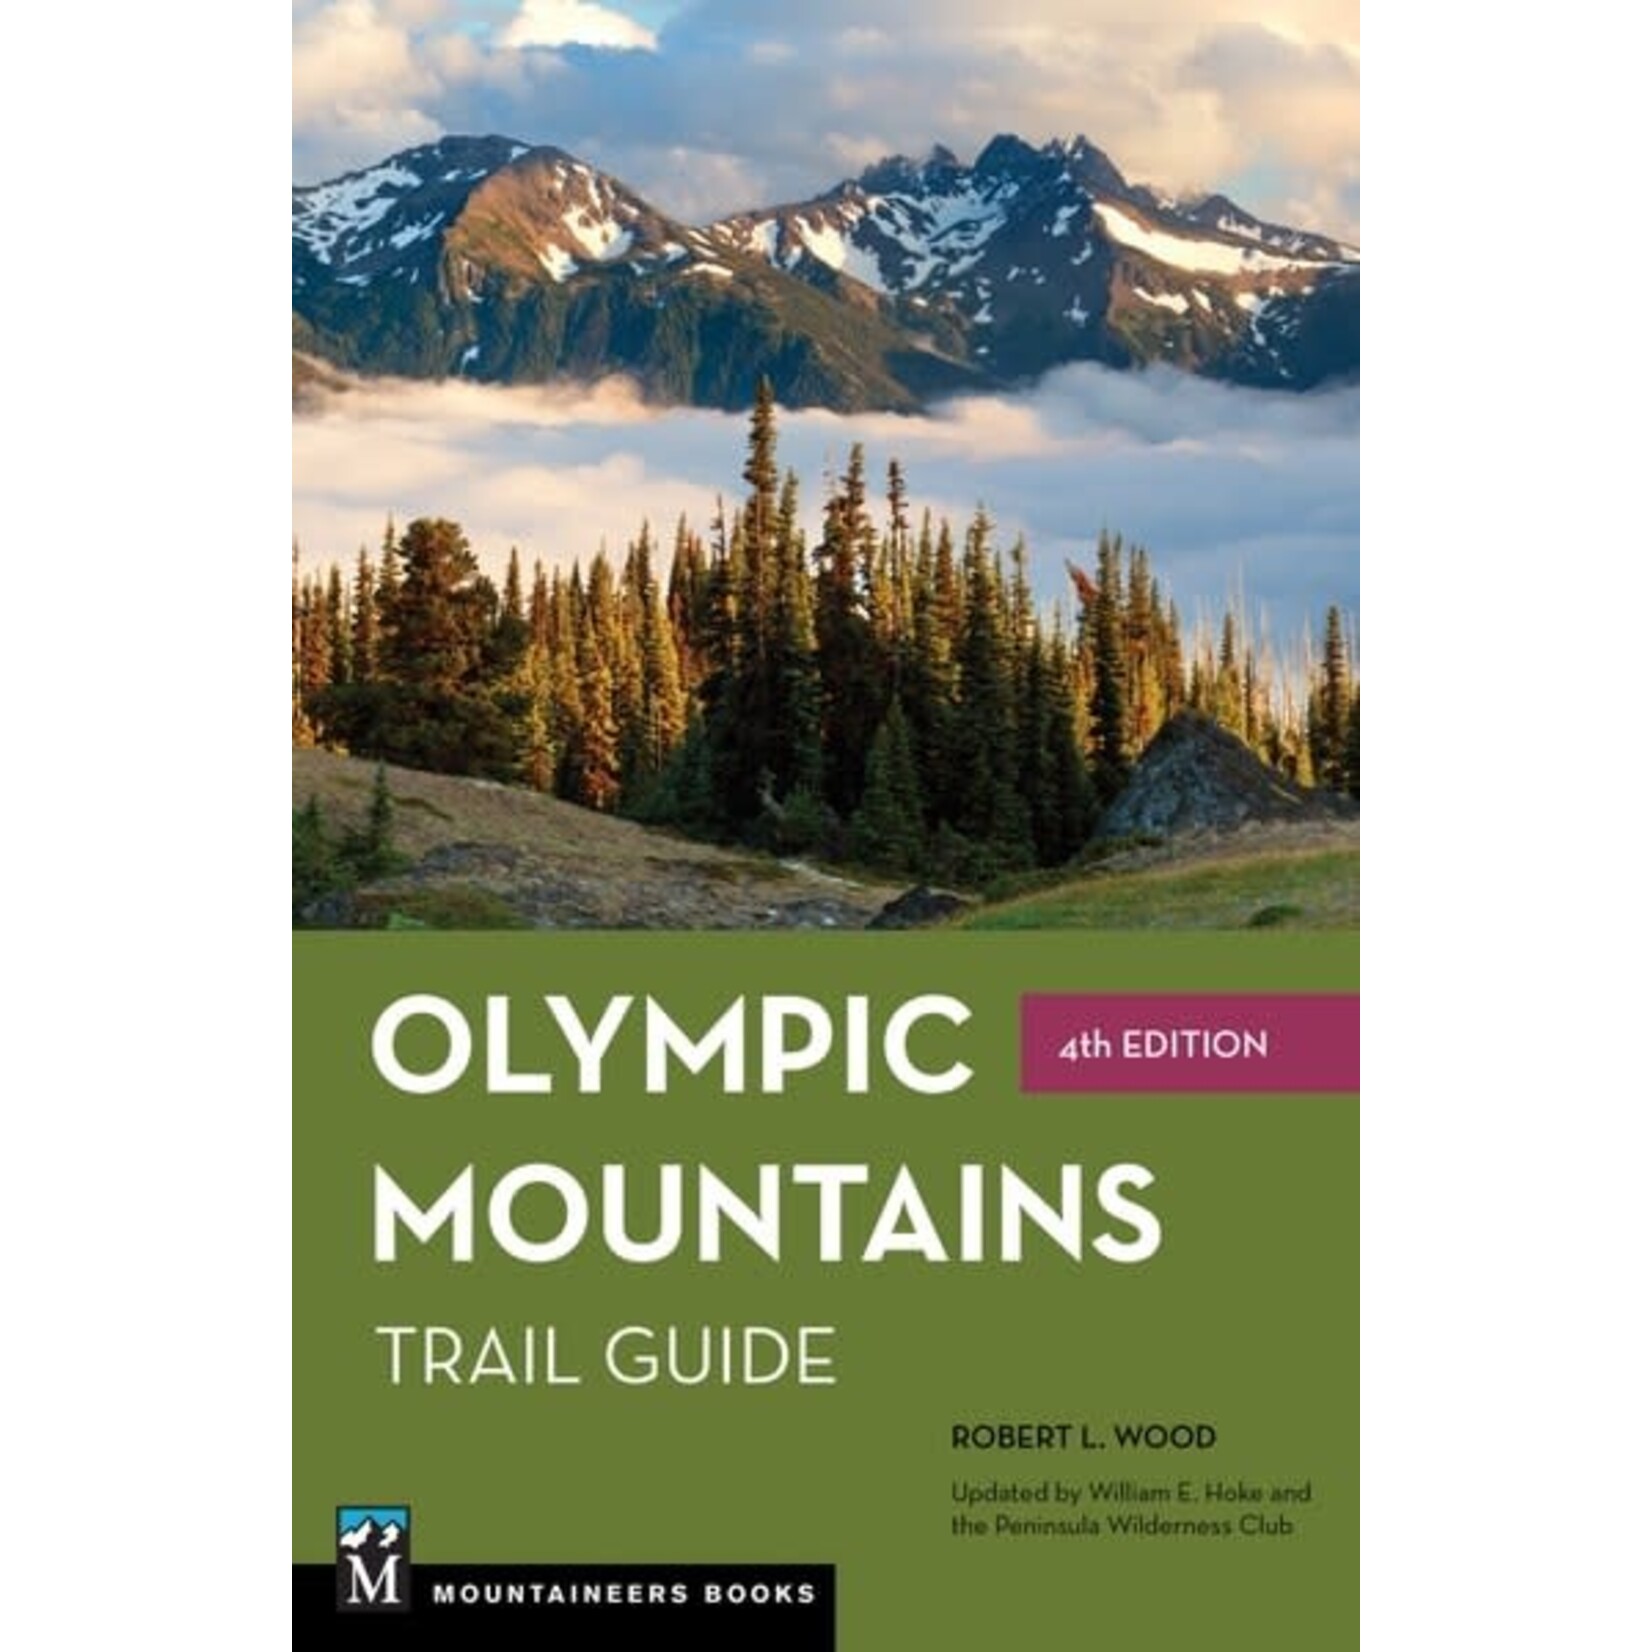 Mountaineers Books Olympic Mountains Trail Guide 4e